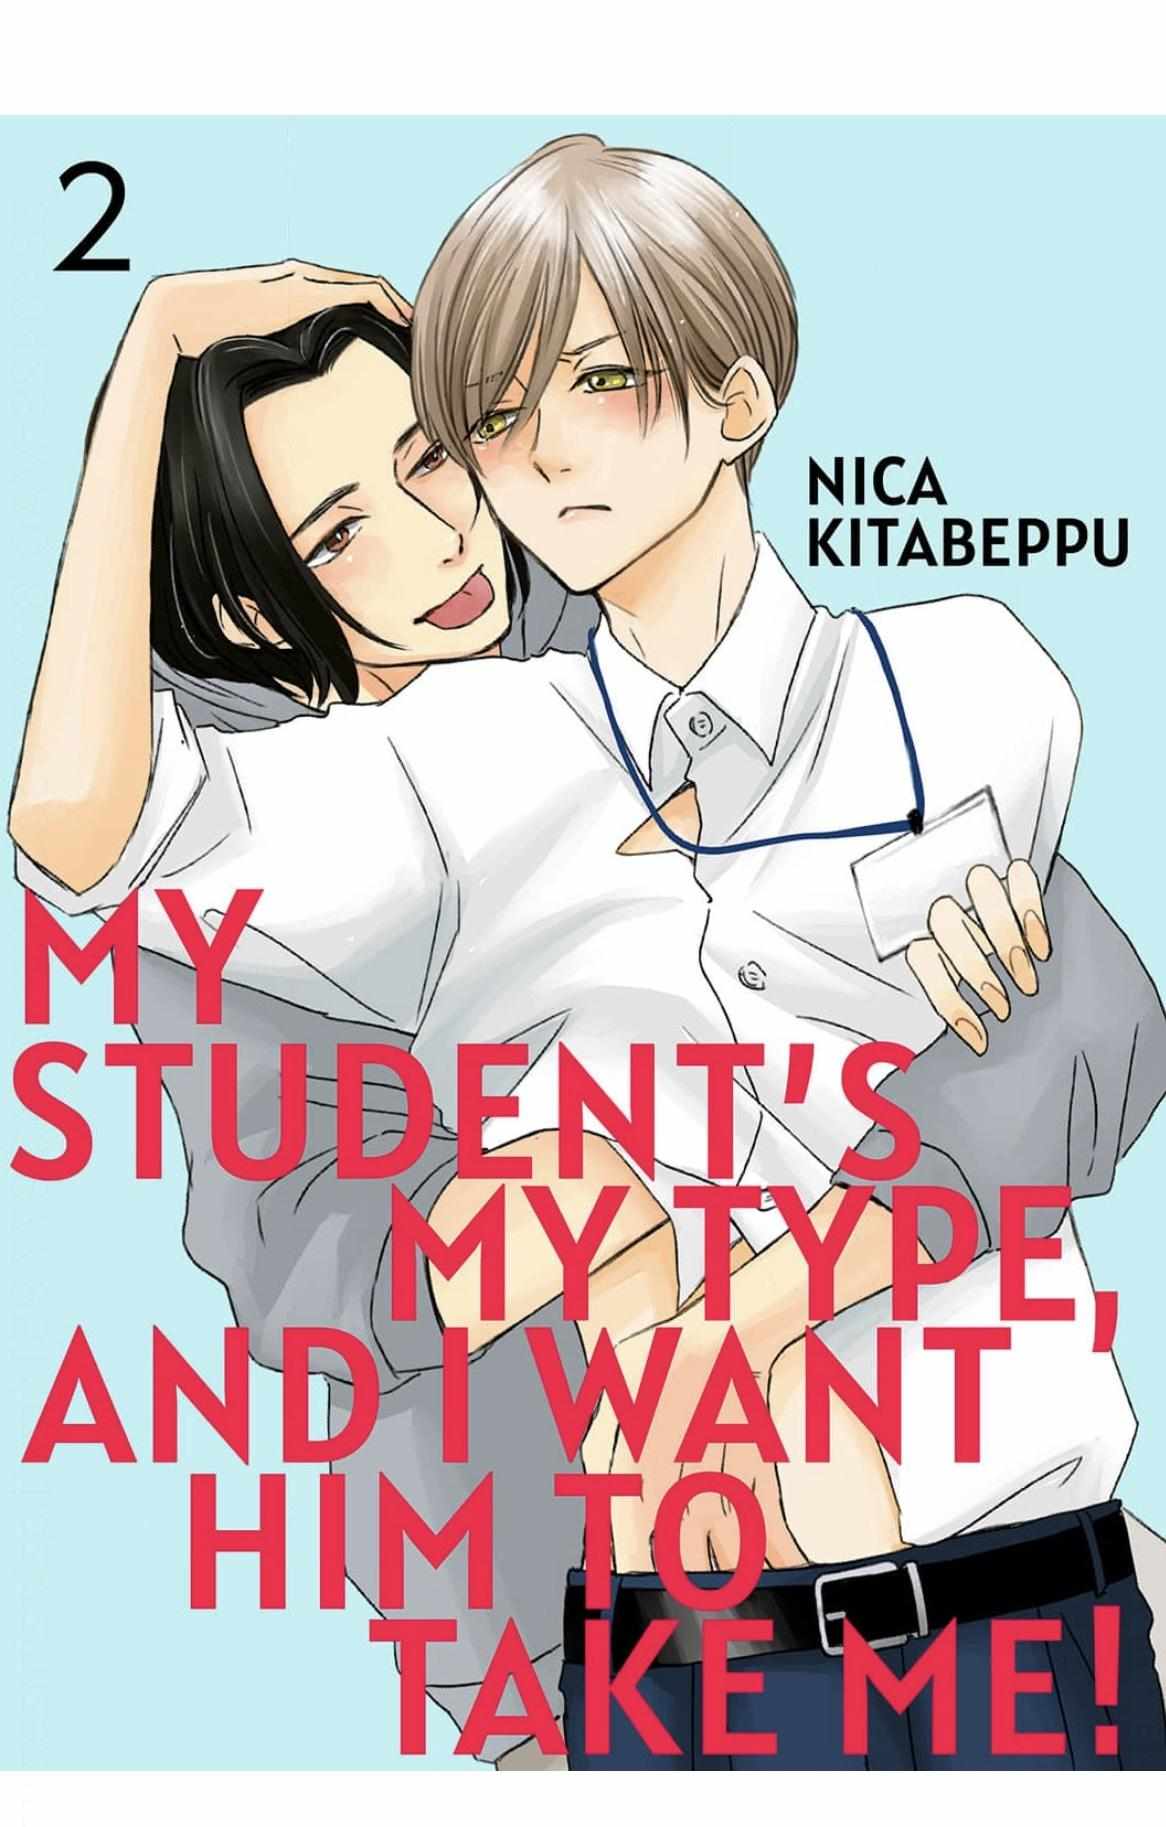 My Student's My Type, And I Want Him To Take Me! - Page 1